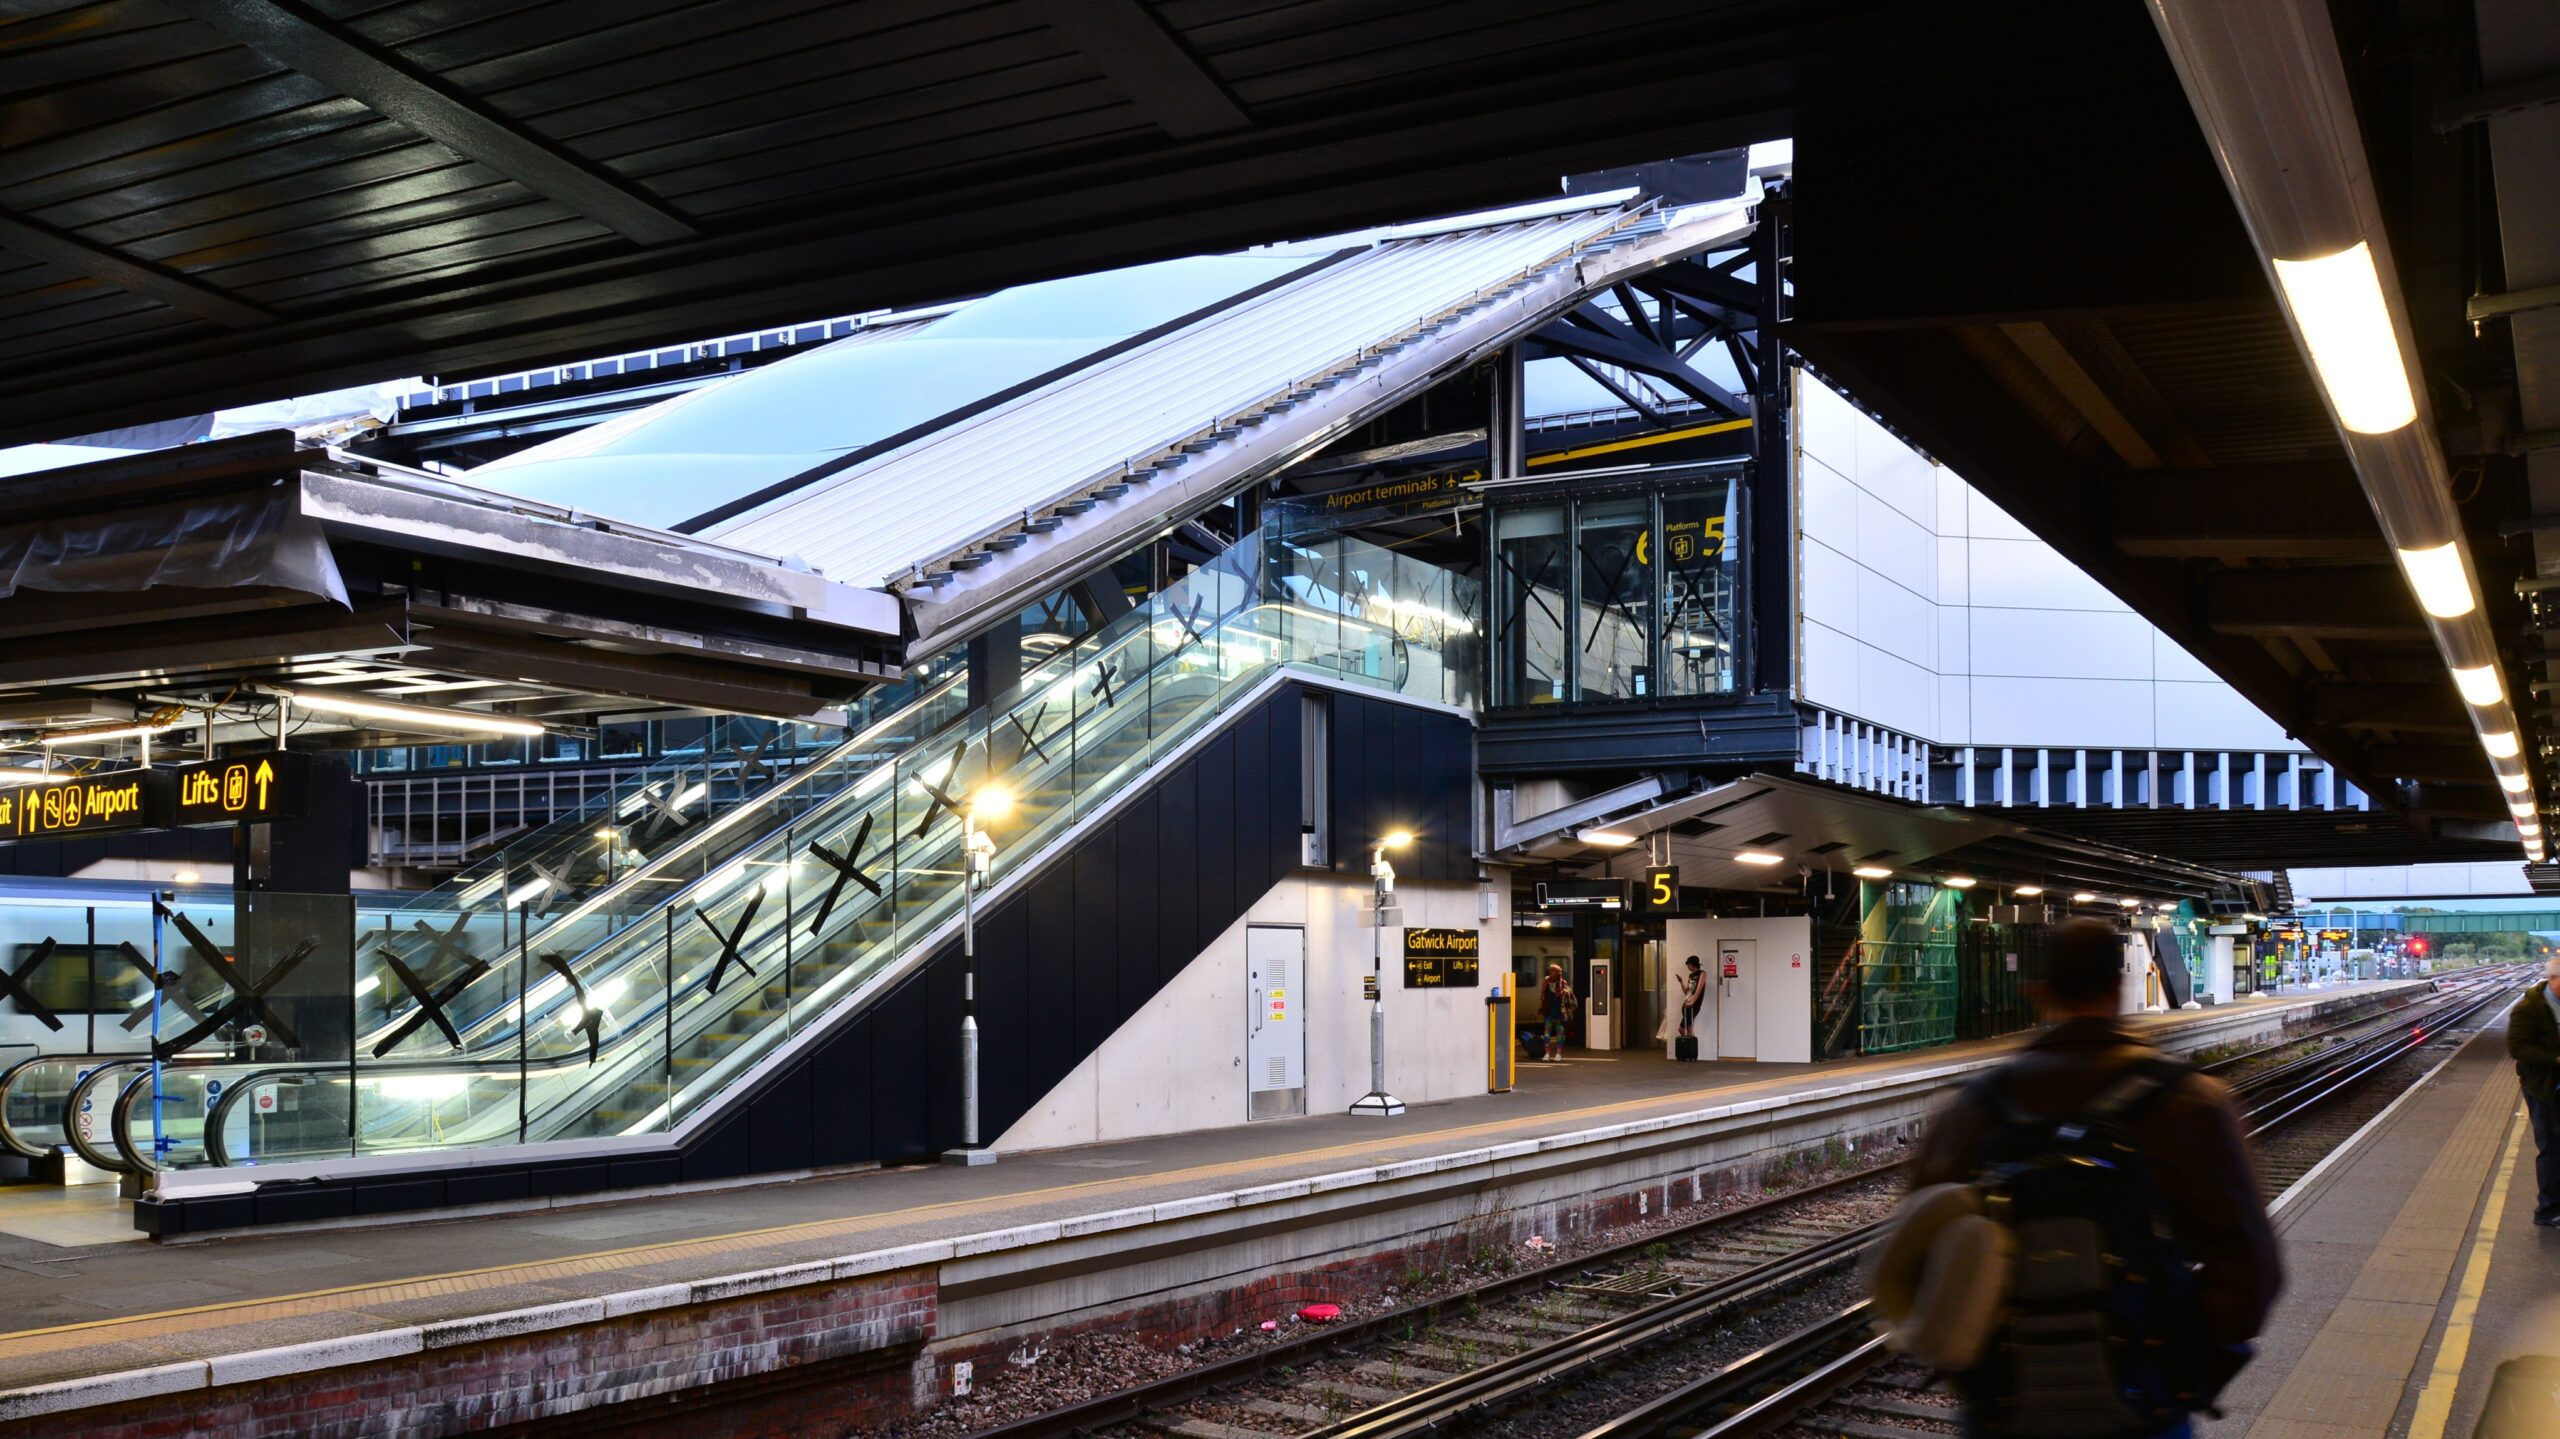 New escalators such as these on platform 5 and 6 will make it seamless for passengers to get from the train to the plane.